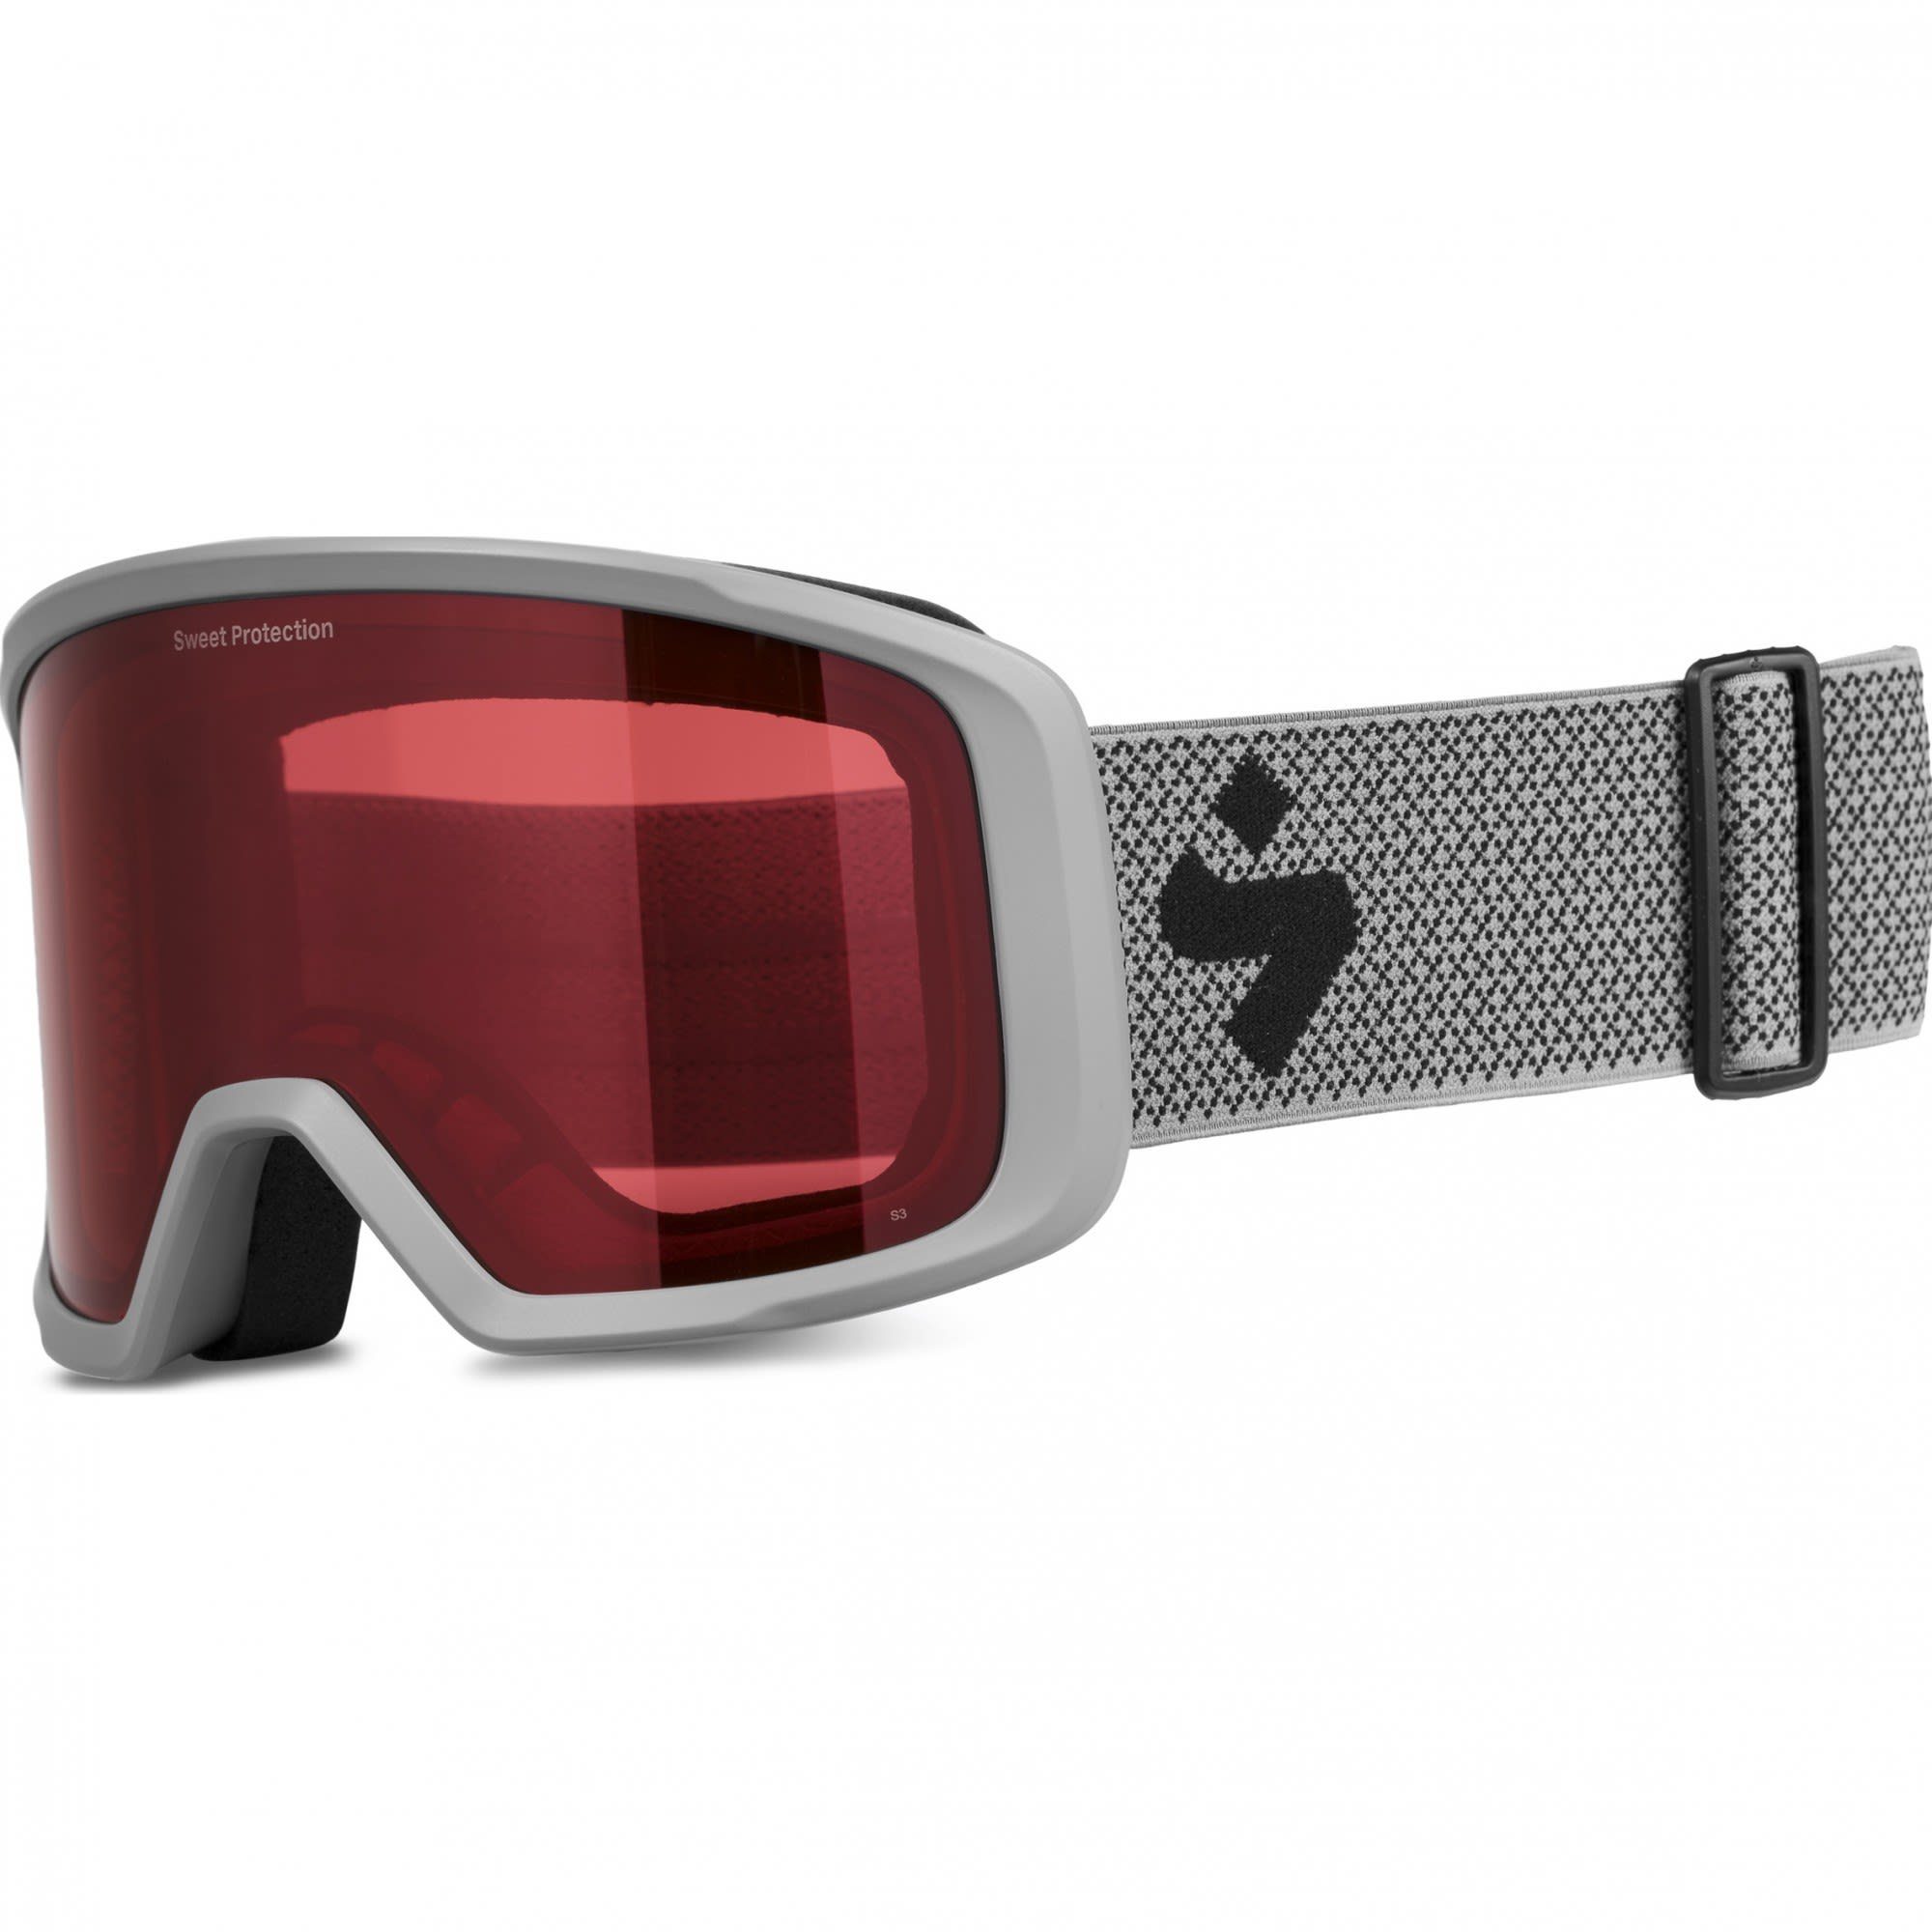 Sweet Protection Skibrille Sweet Protection Firewall Reflect Accessoires Satin Red - Nardo Gray - Nardo Plaid